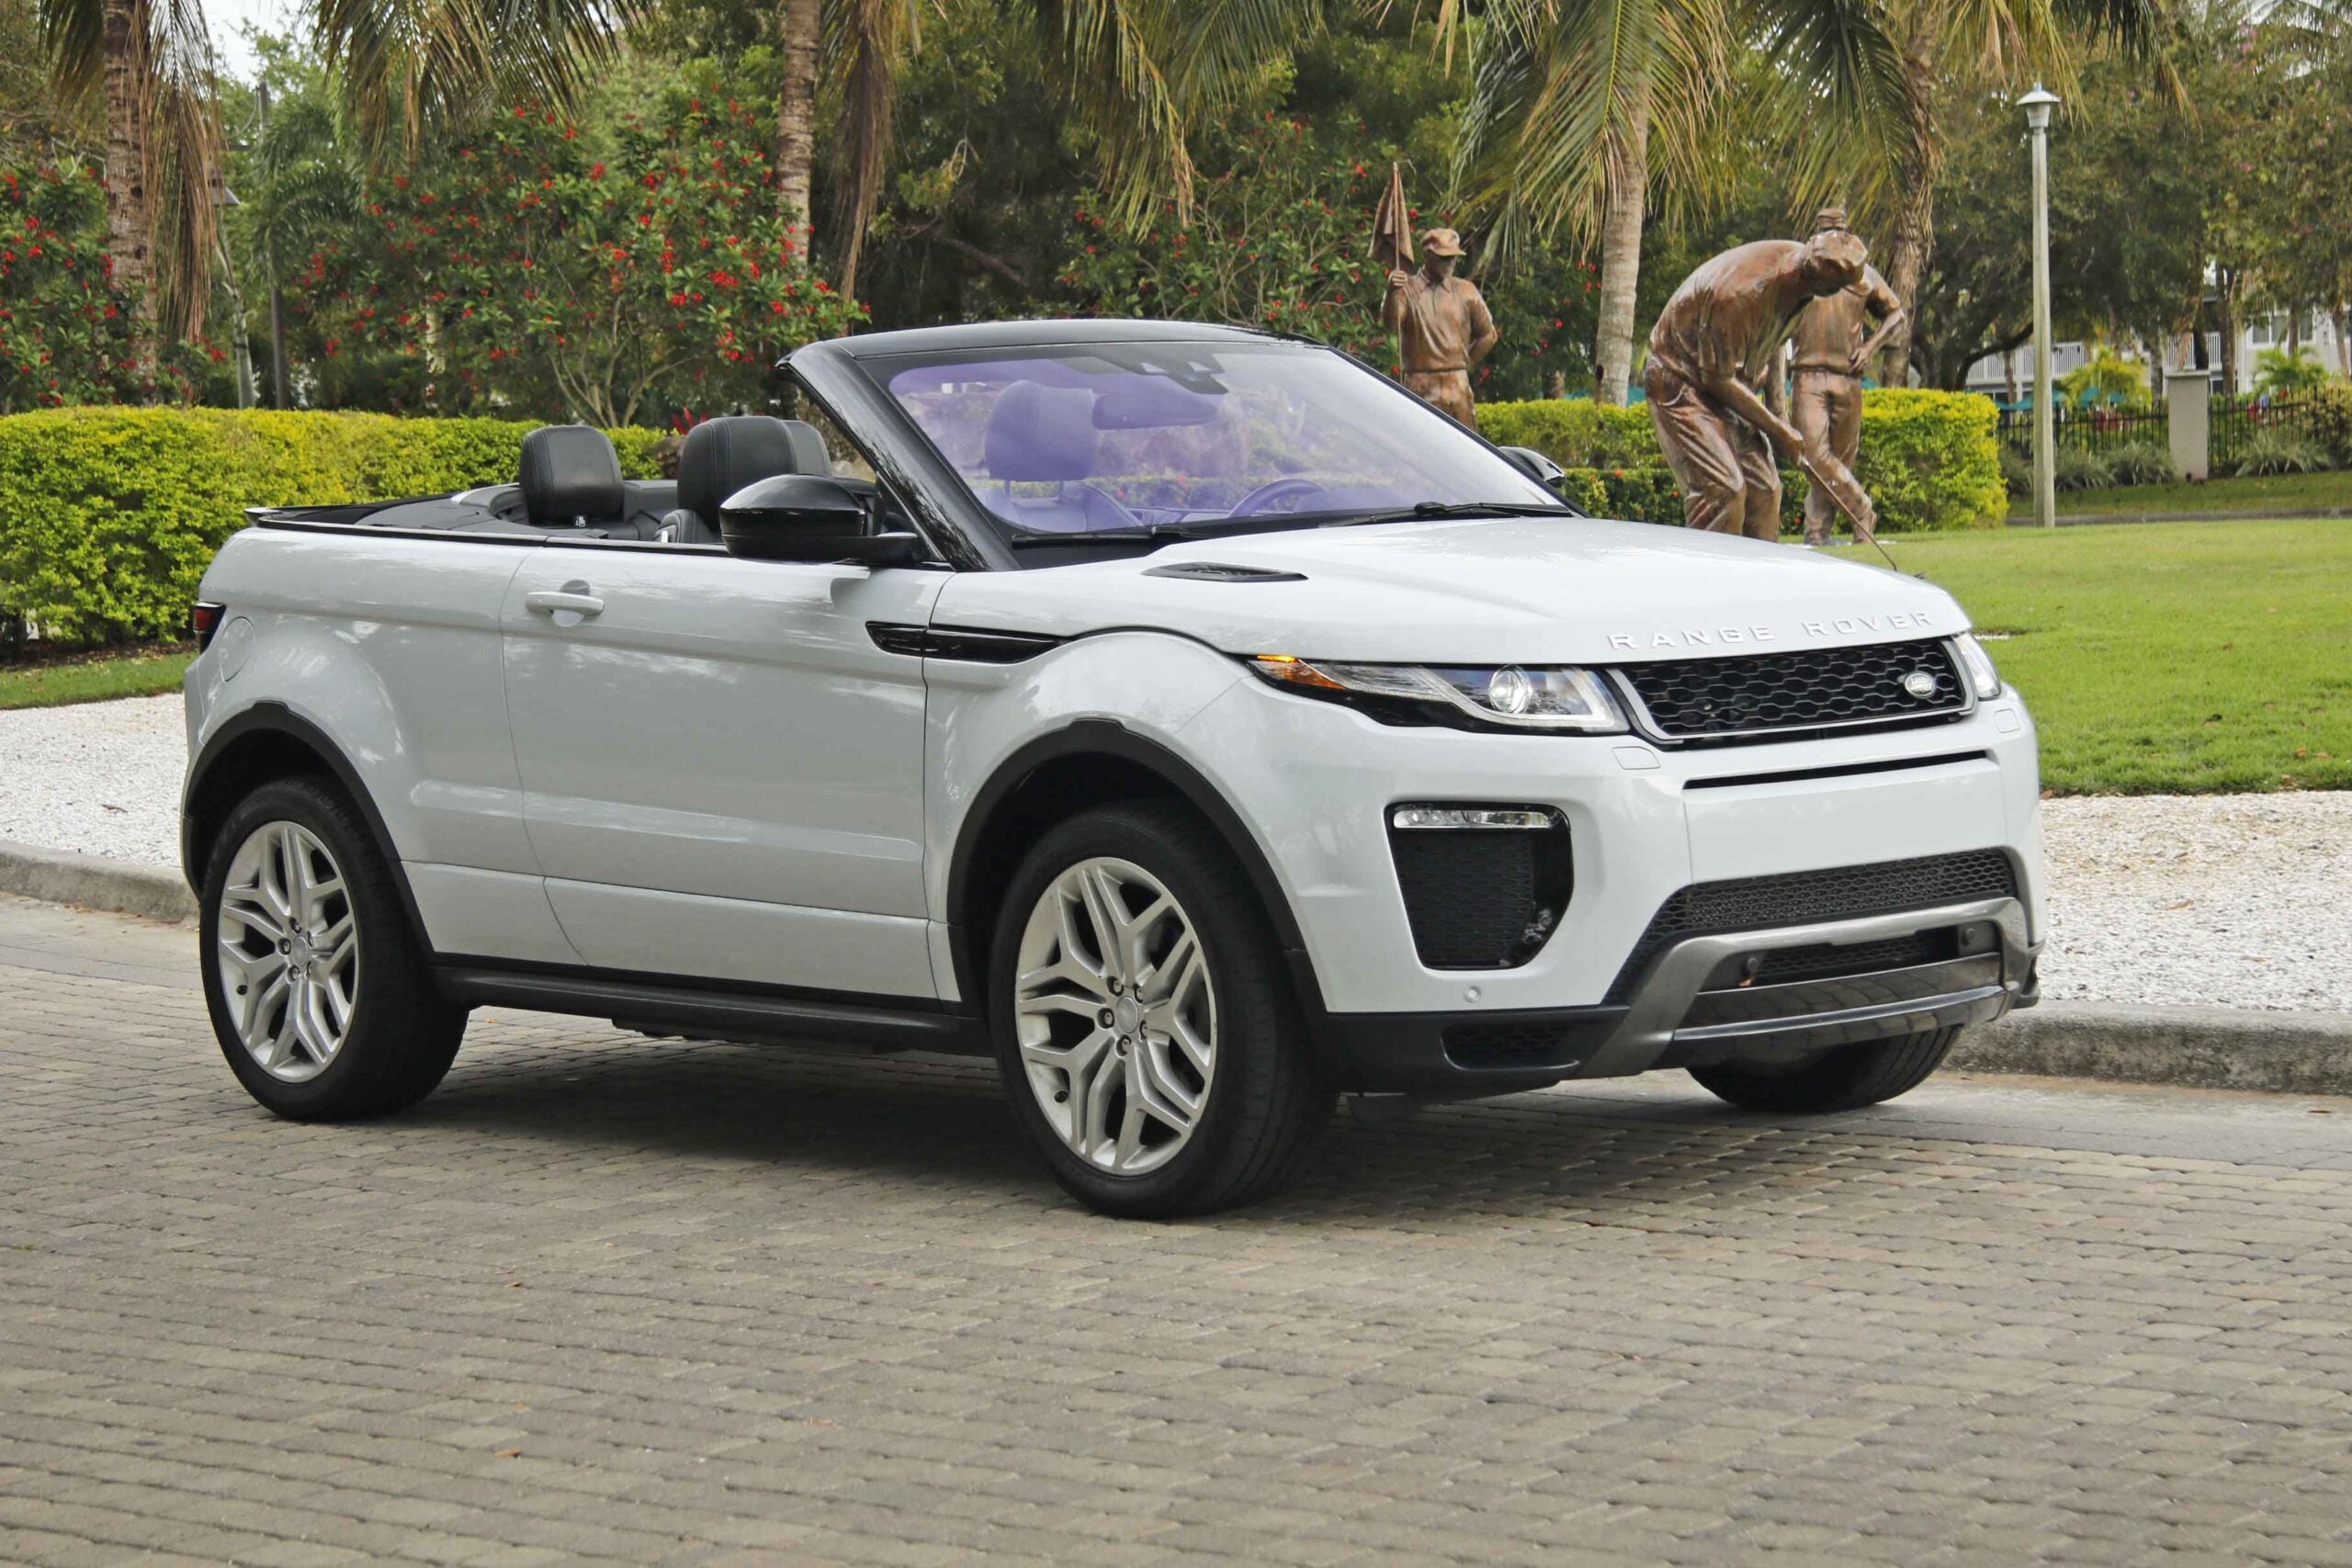 Review: Evoque convertible makes you flip your lid